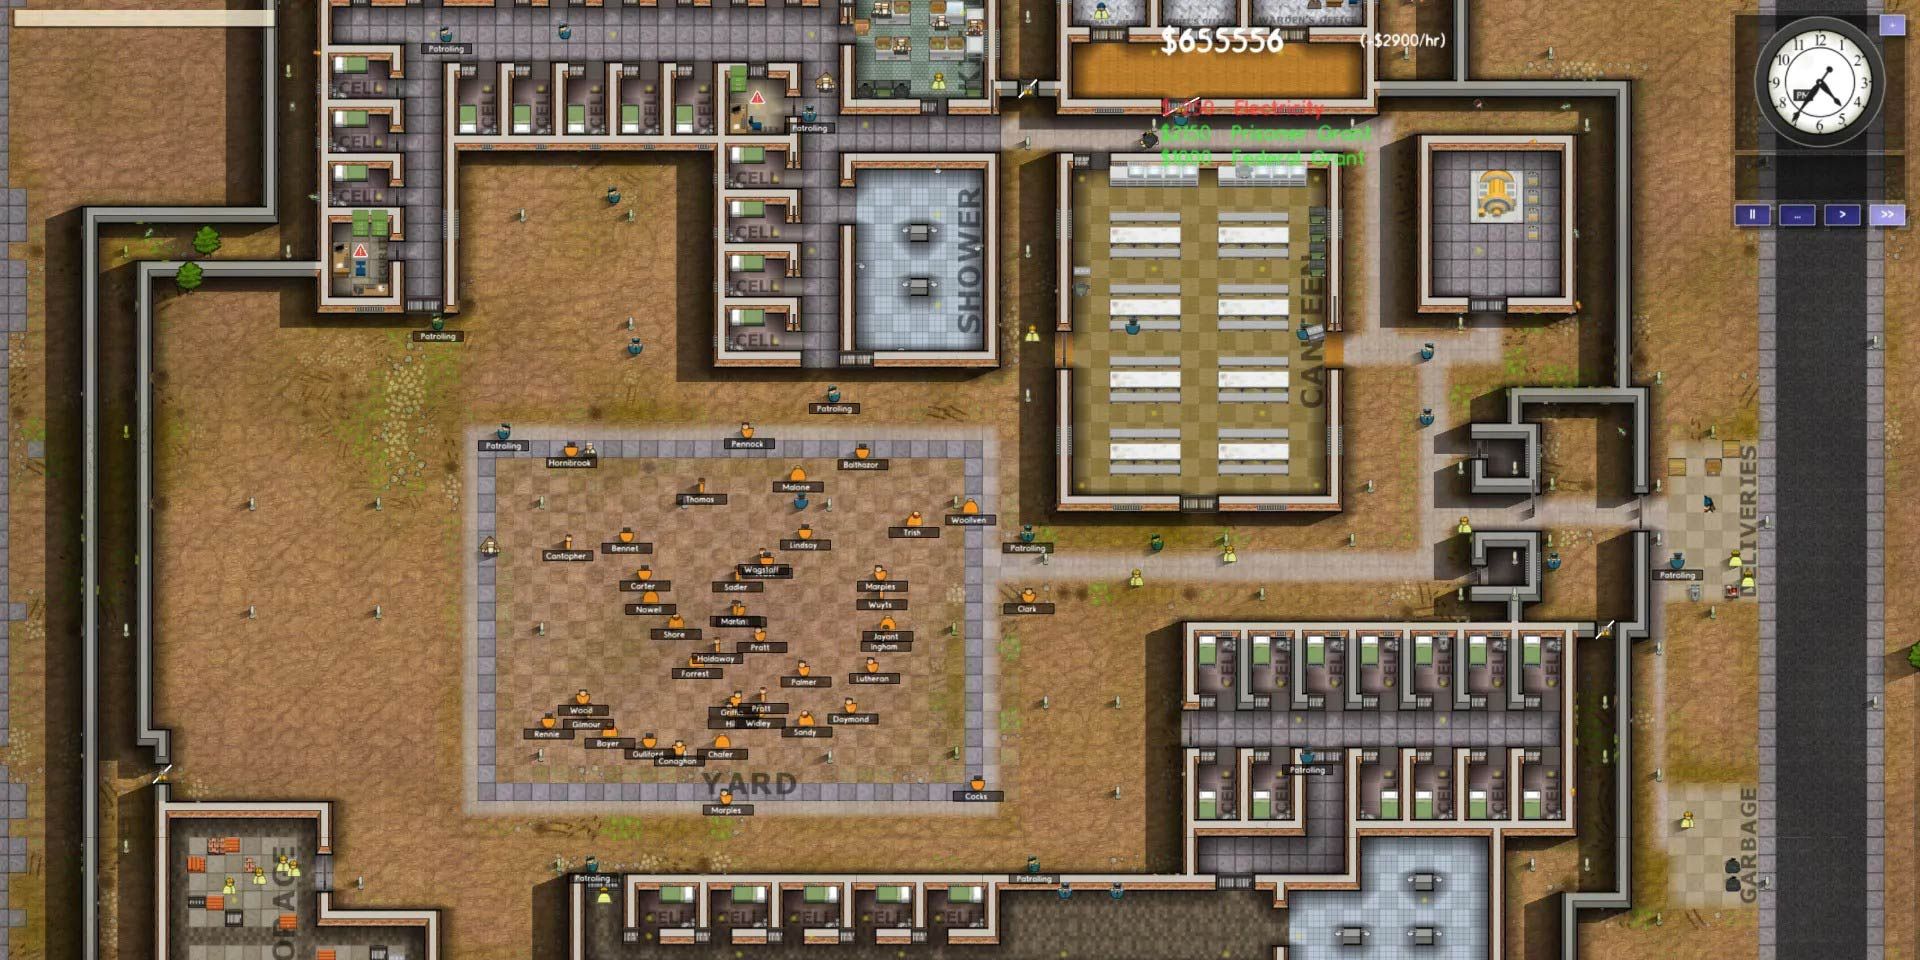 A prison yard in Prison Architect, with inmates getting their daily excercise.